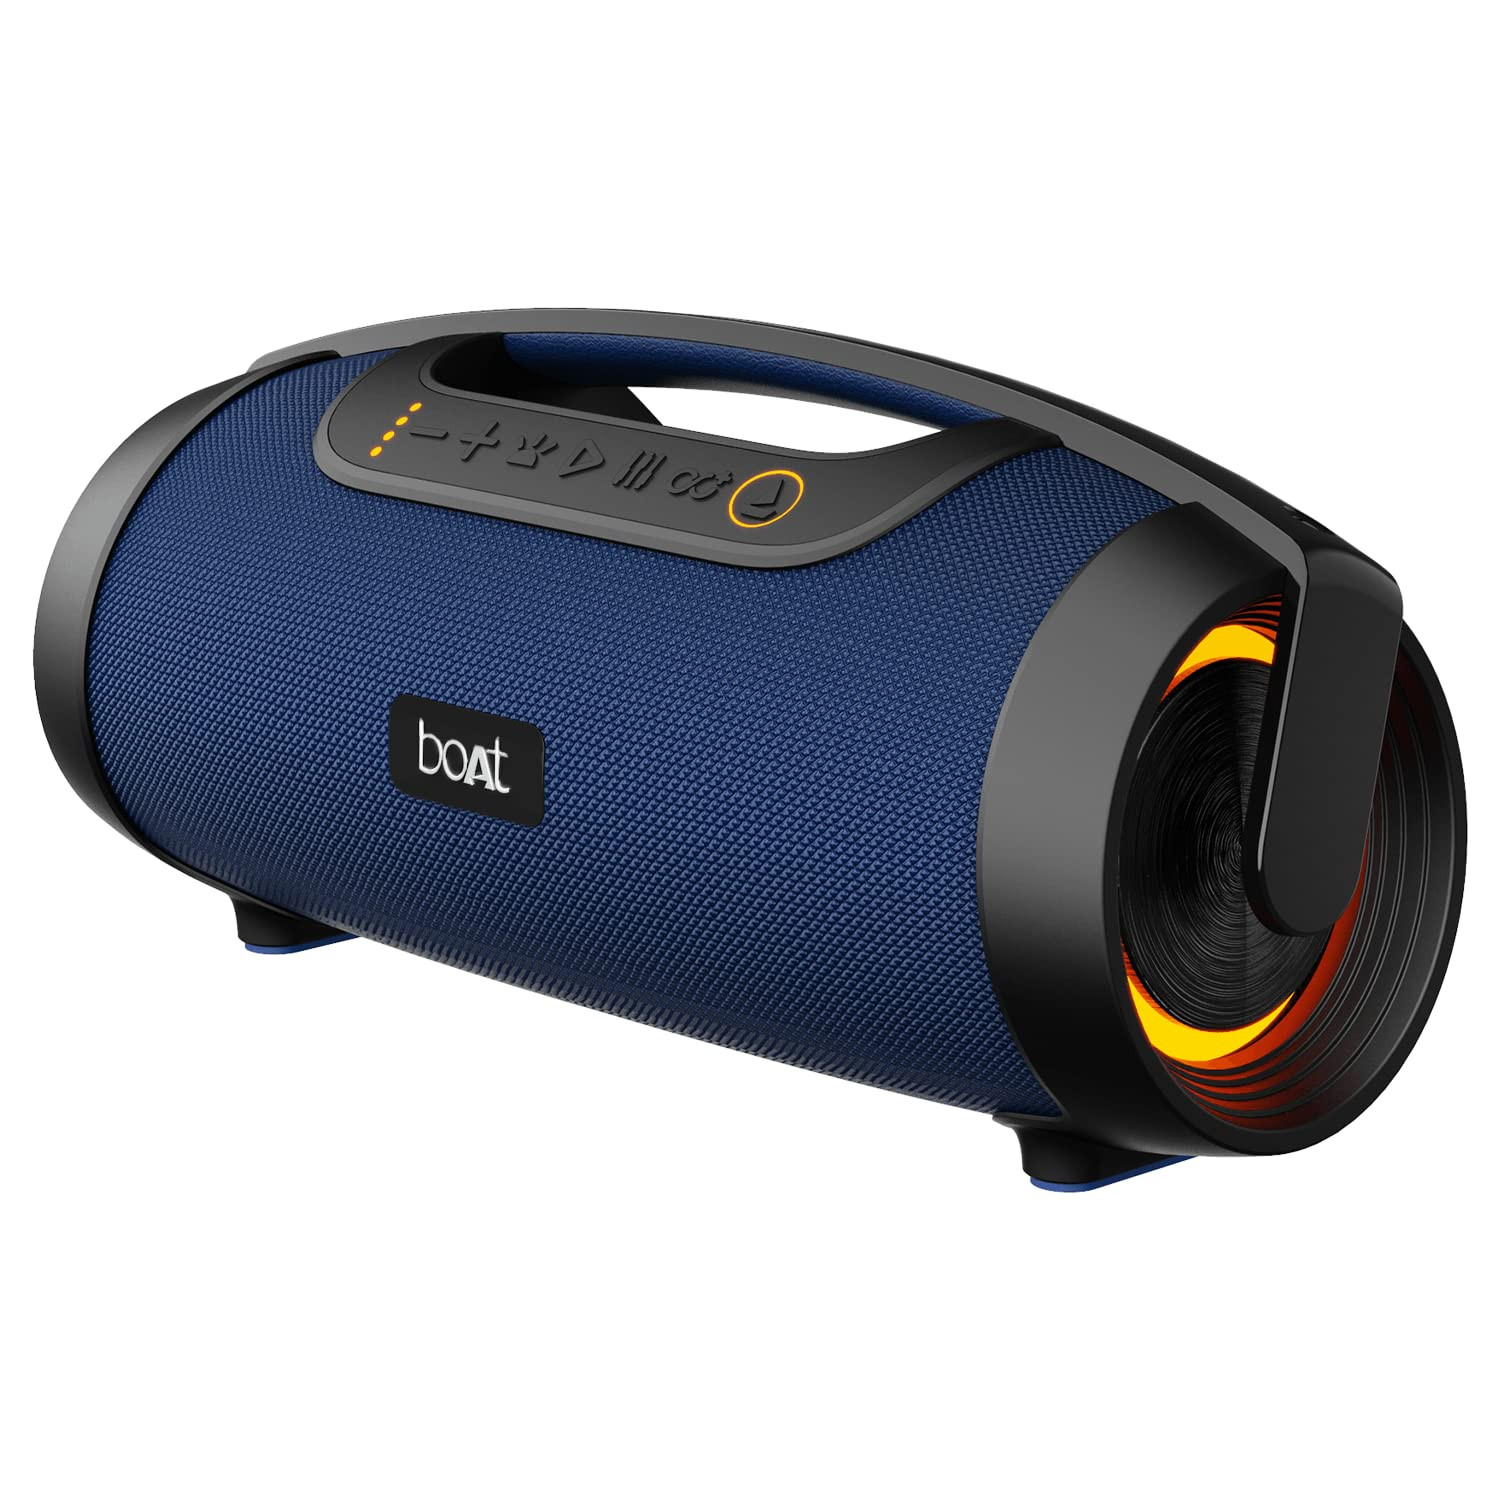 boAt Stone 1450 Portable Wireless Speaker with 40W RMS Signature Sound, RGB LEDs, TWS Feature, Multi-Compatibility Modes, IPX5 Water Resistance, EQ Modes(Blue Thunder)